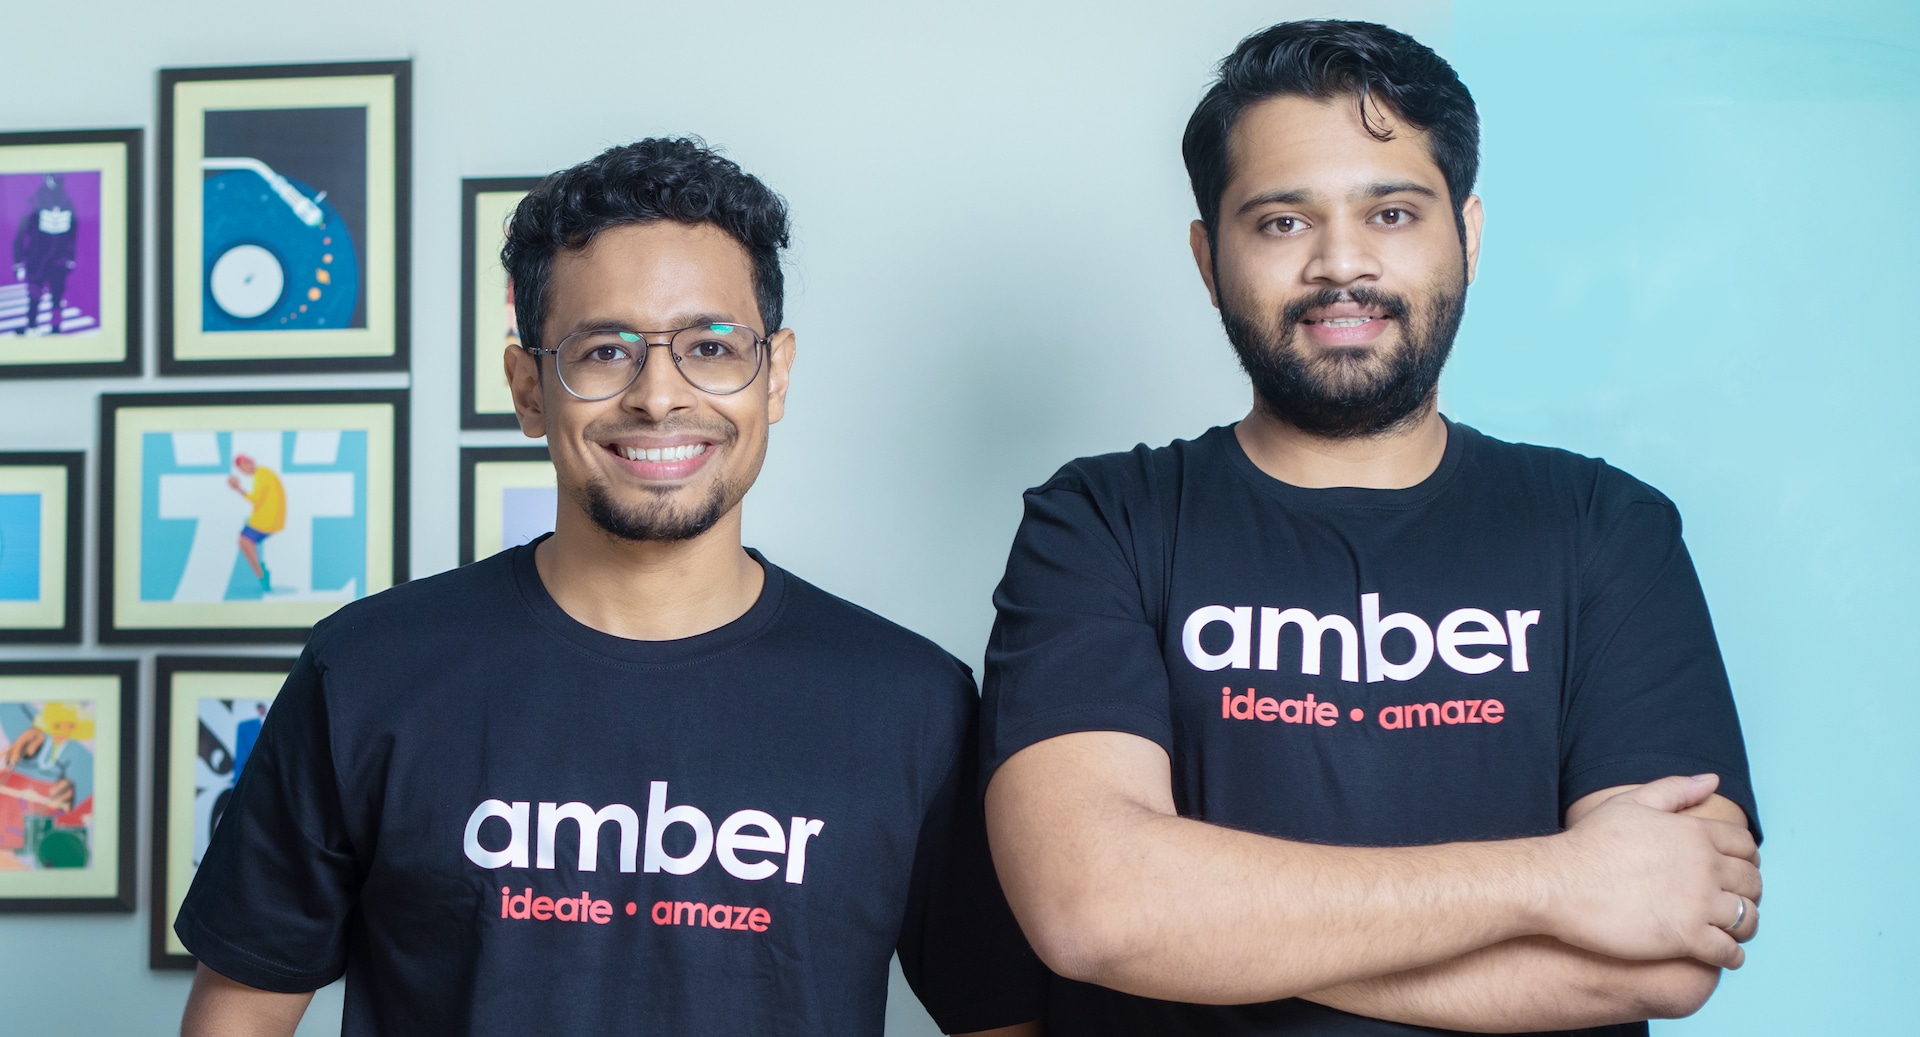 Amber announces its first ESOP buy-back plan